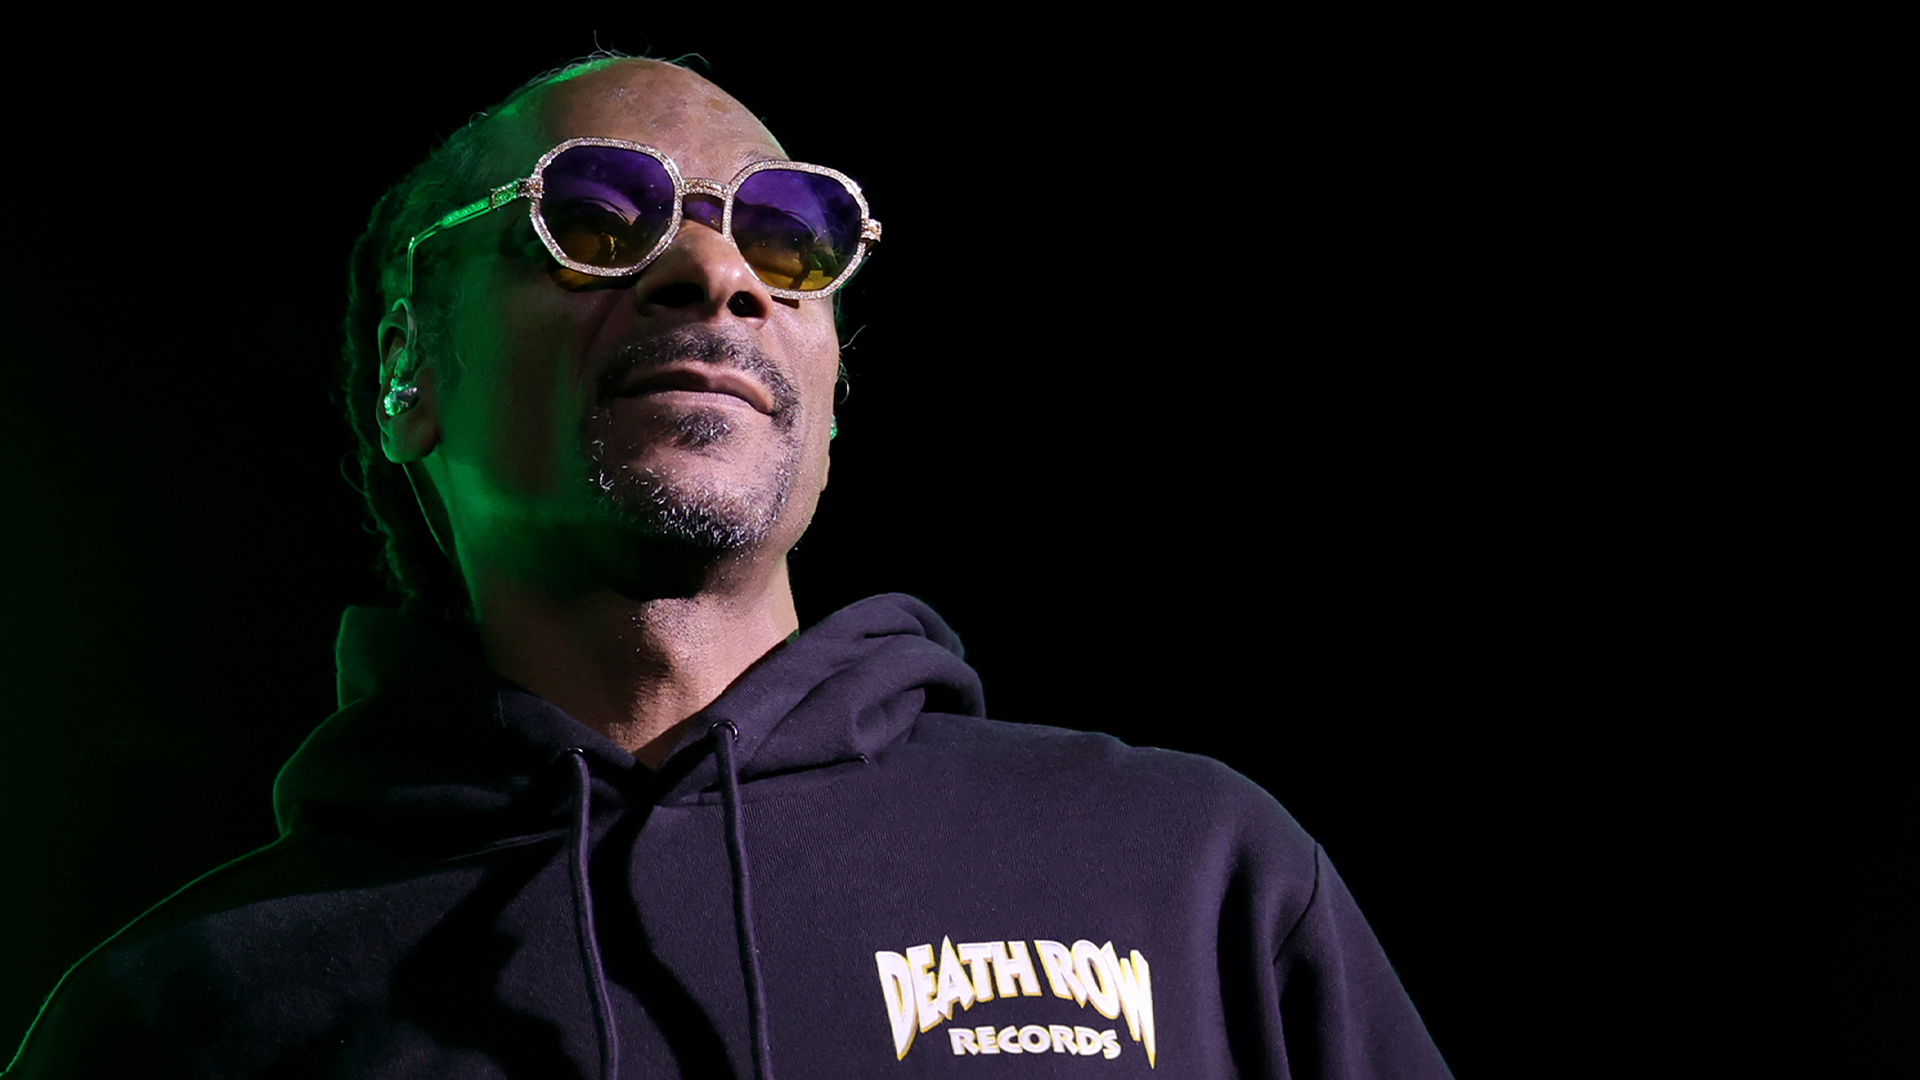 Snoop Dogg Is Not Happy With How Black Creators Are Compensated By Streaming Giants —'It’s Not Cool To Just Keep Stealing Our Culture'